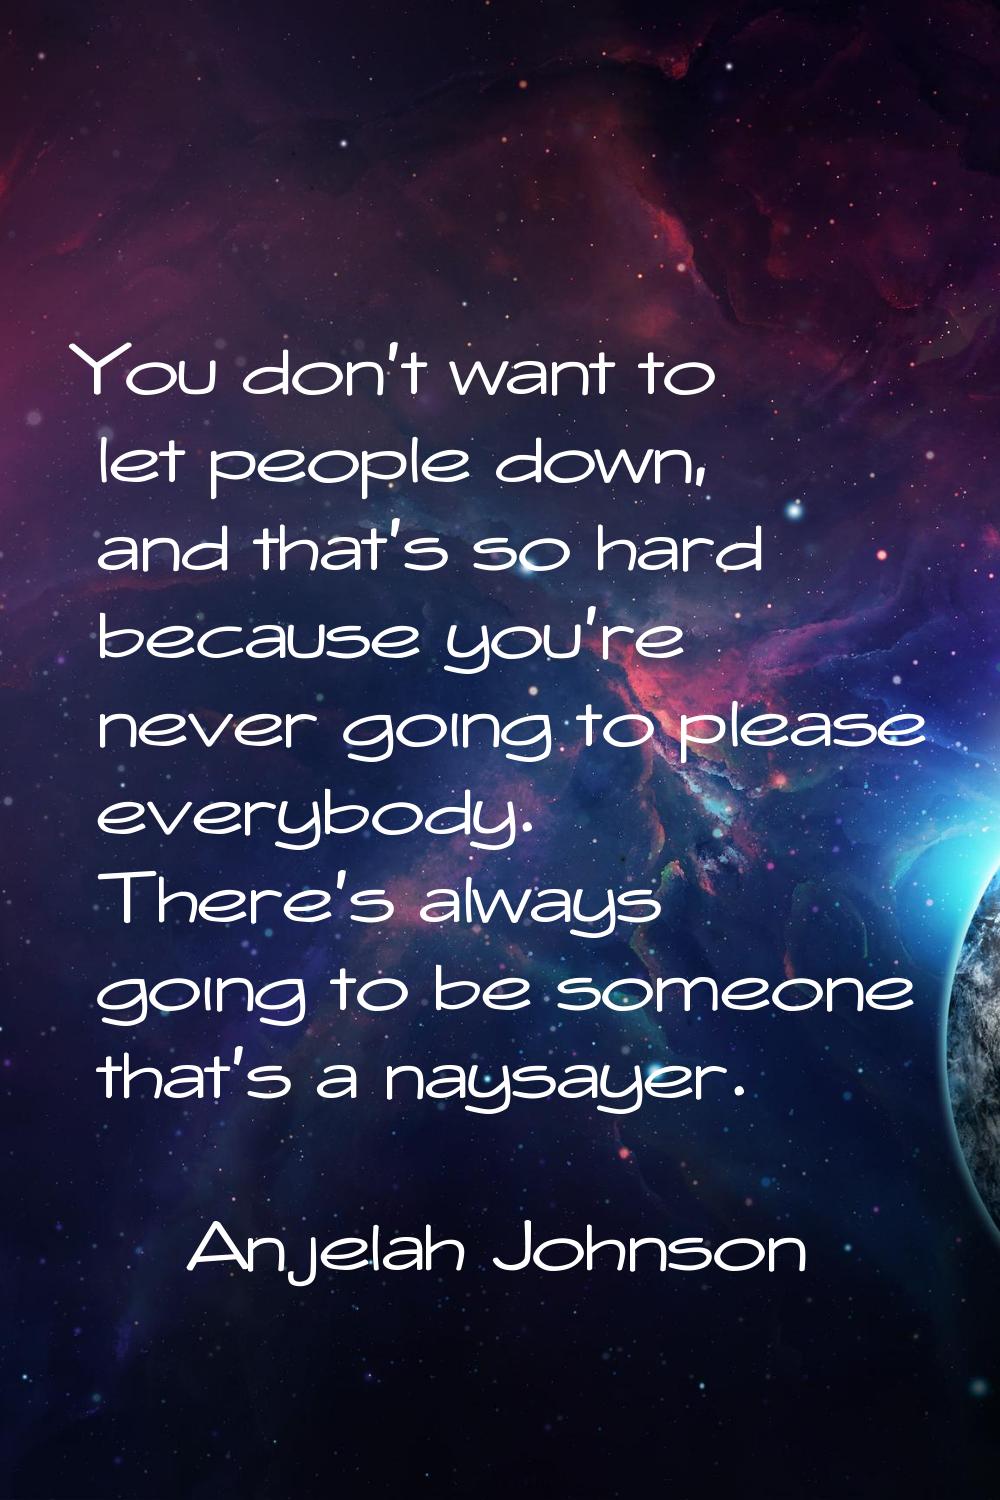 You don't want to let people down, and that's so hard because you're never going to please everybod